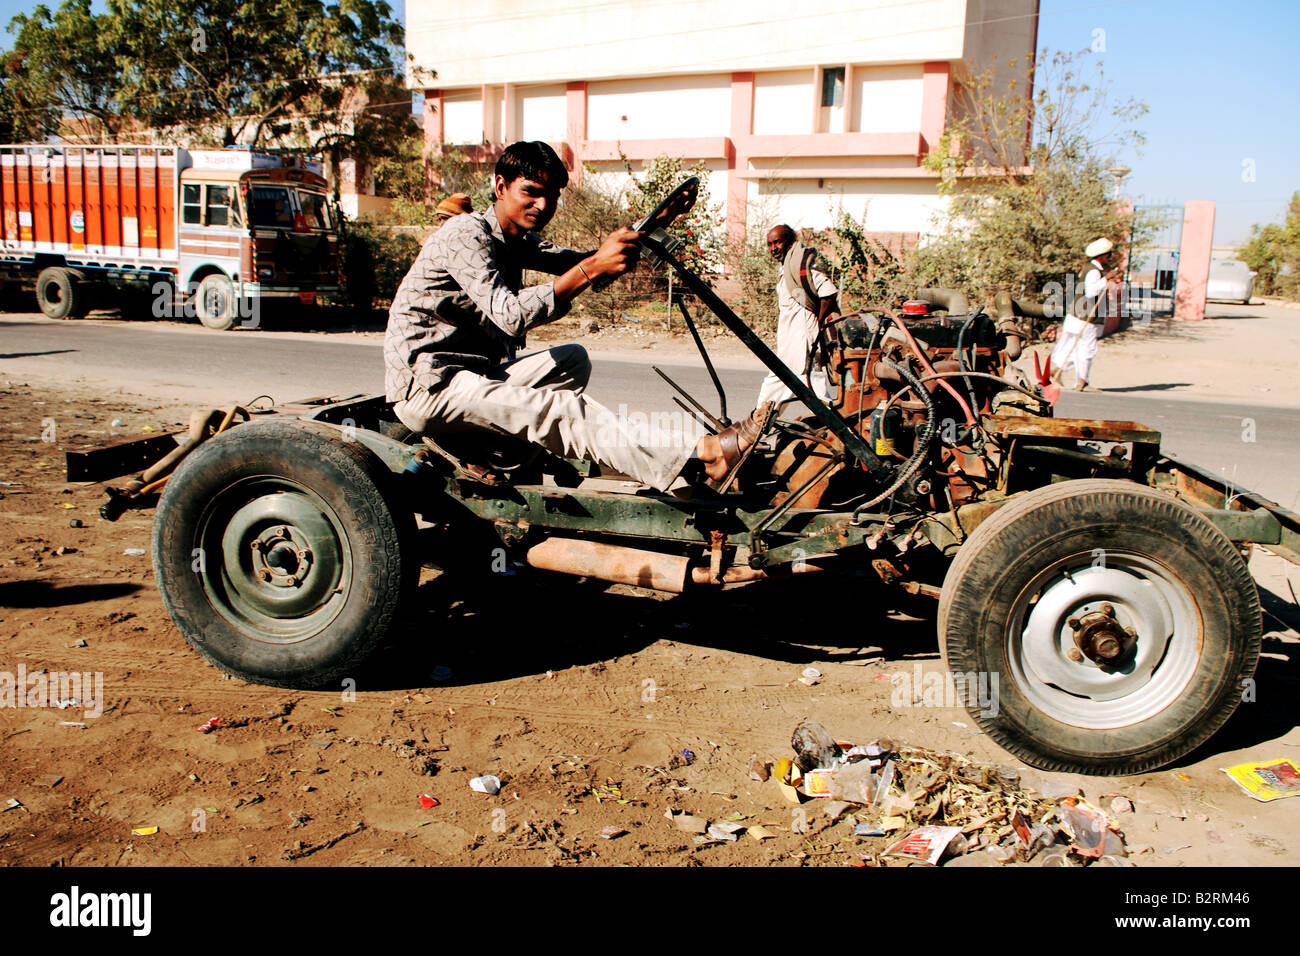 Formula One or maybe not A very old car on the dusty roads of Rajasthan India Stock Photo